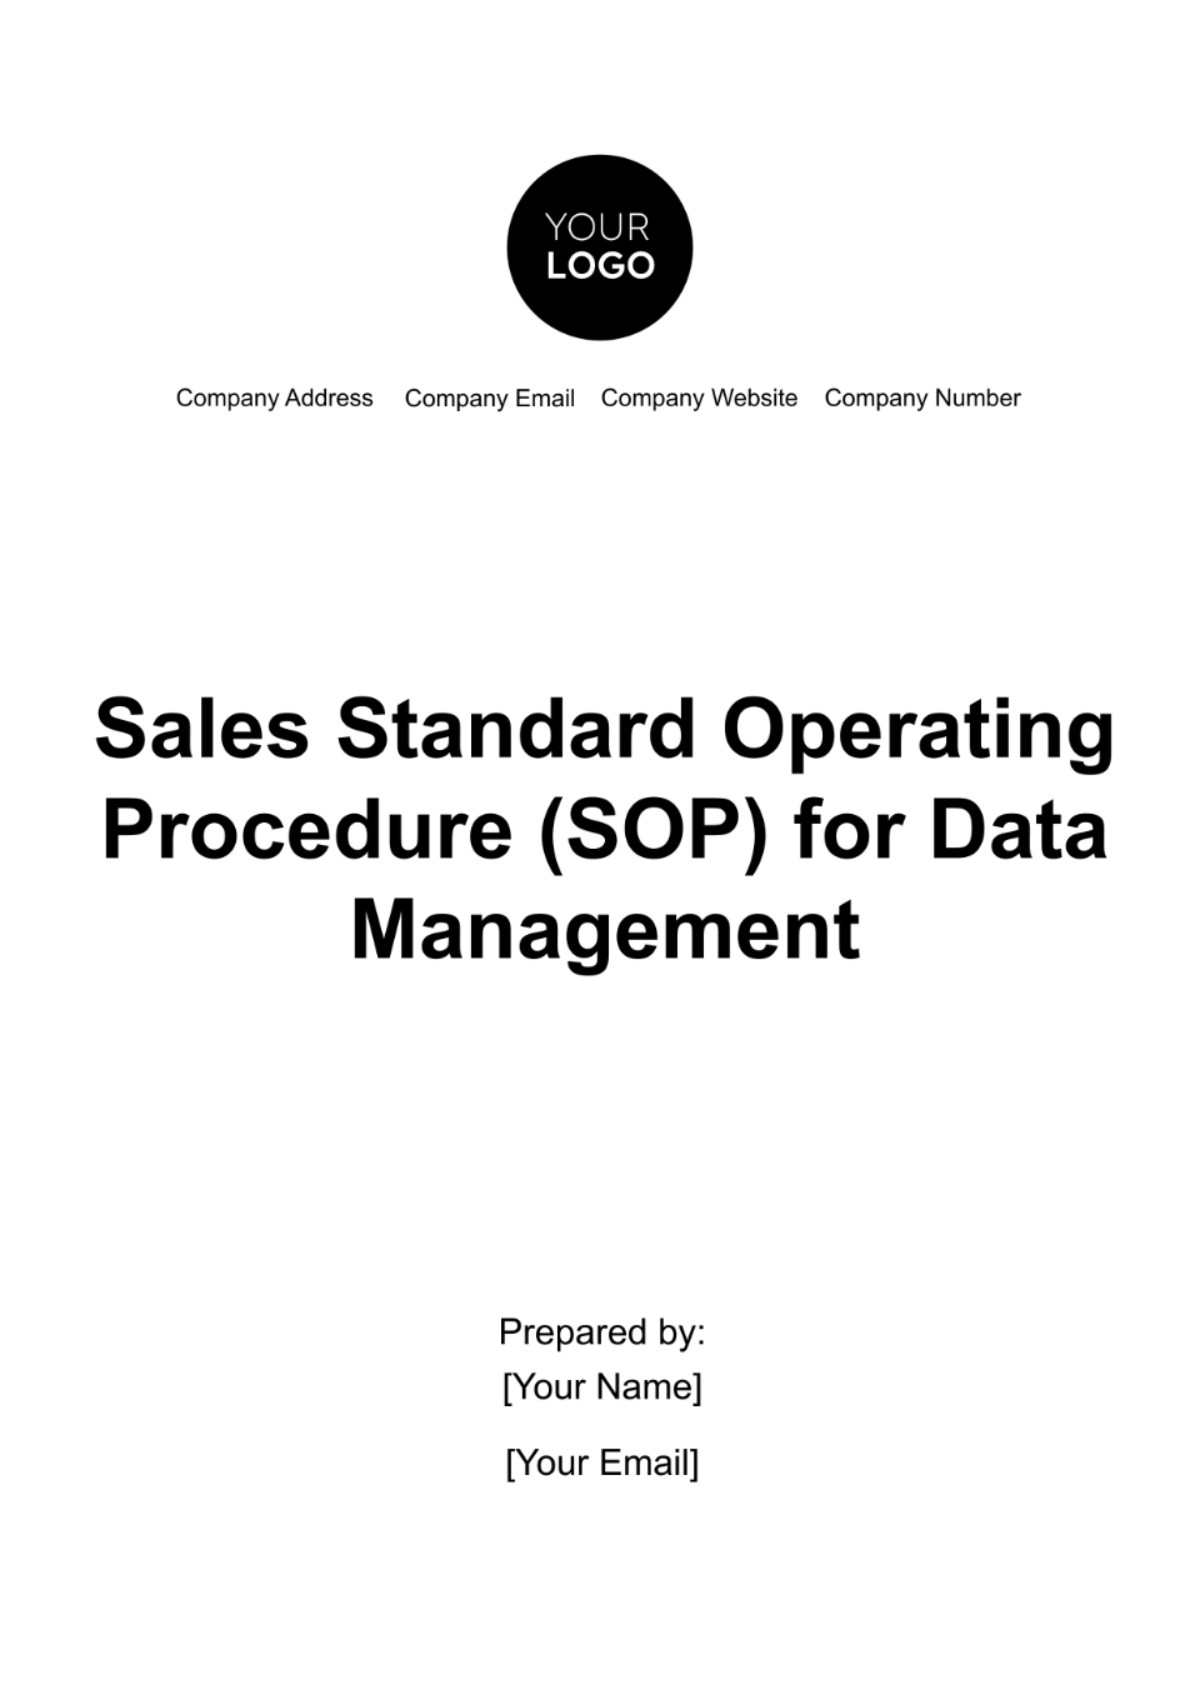 Free Sales Standard Operating Procedure (SOP) for Data Management Template